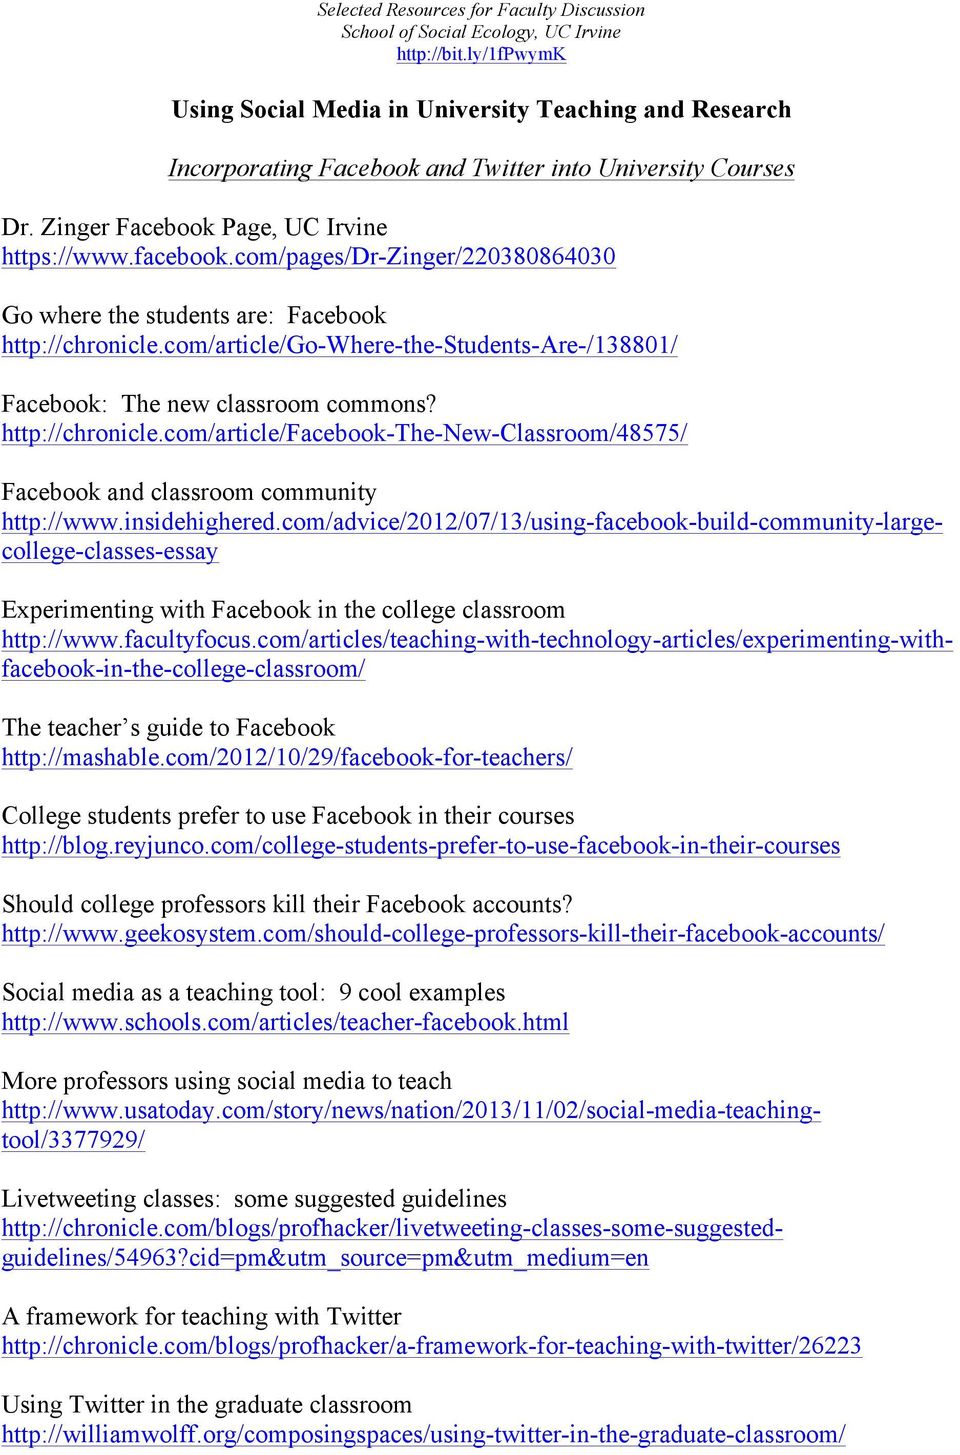 com/pages/dr-zinger/220380864030 Go where the students are: Facebook http://chronicle.com/article/go-where-the-students-are-/138801/ Facebook: The new classroom commons? http://chronicle.com/article/facebook-the-new-classroom/48575/ Facebook and classroom community http://www.